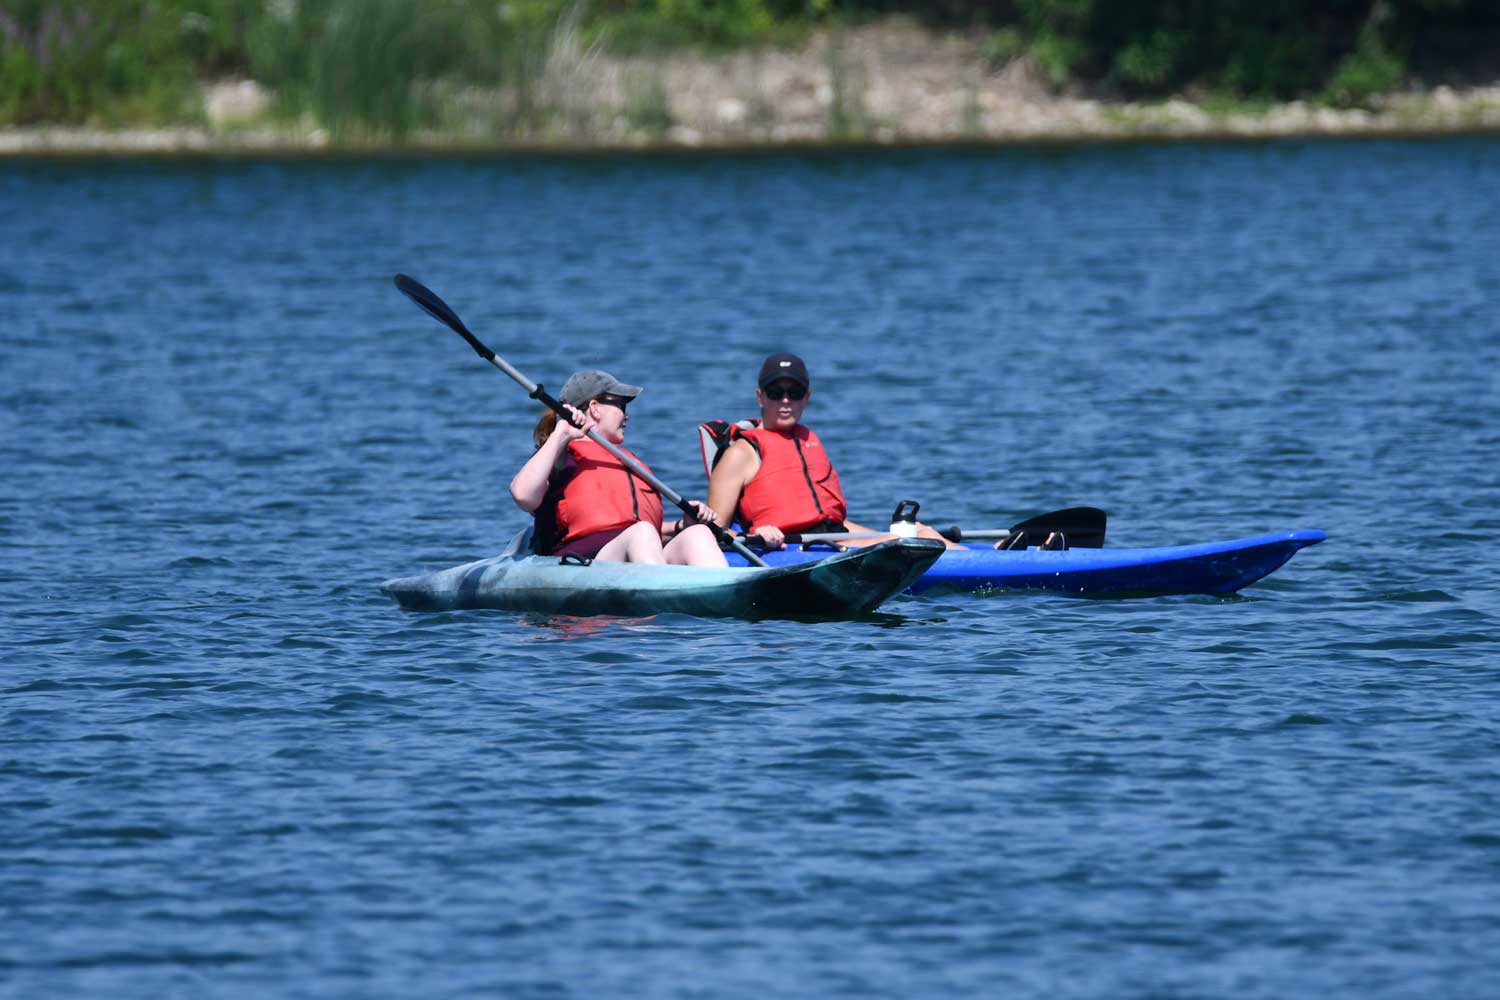 Two people side by side in their kayaks in the middle of a lake.